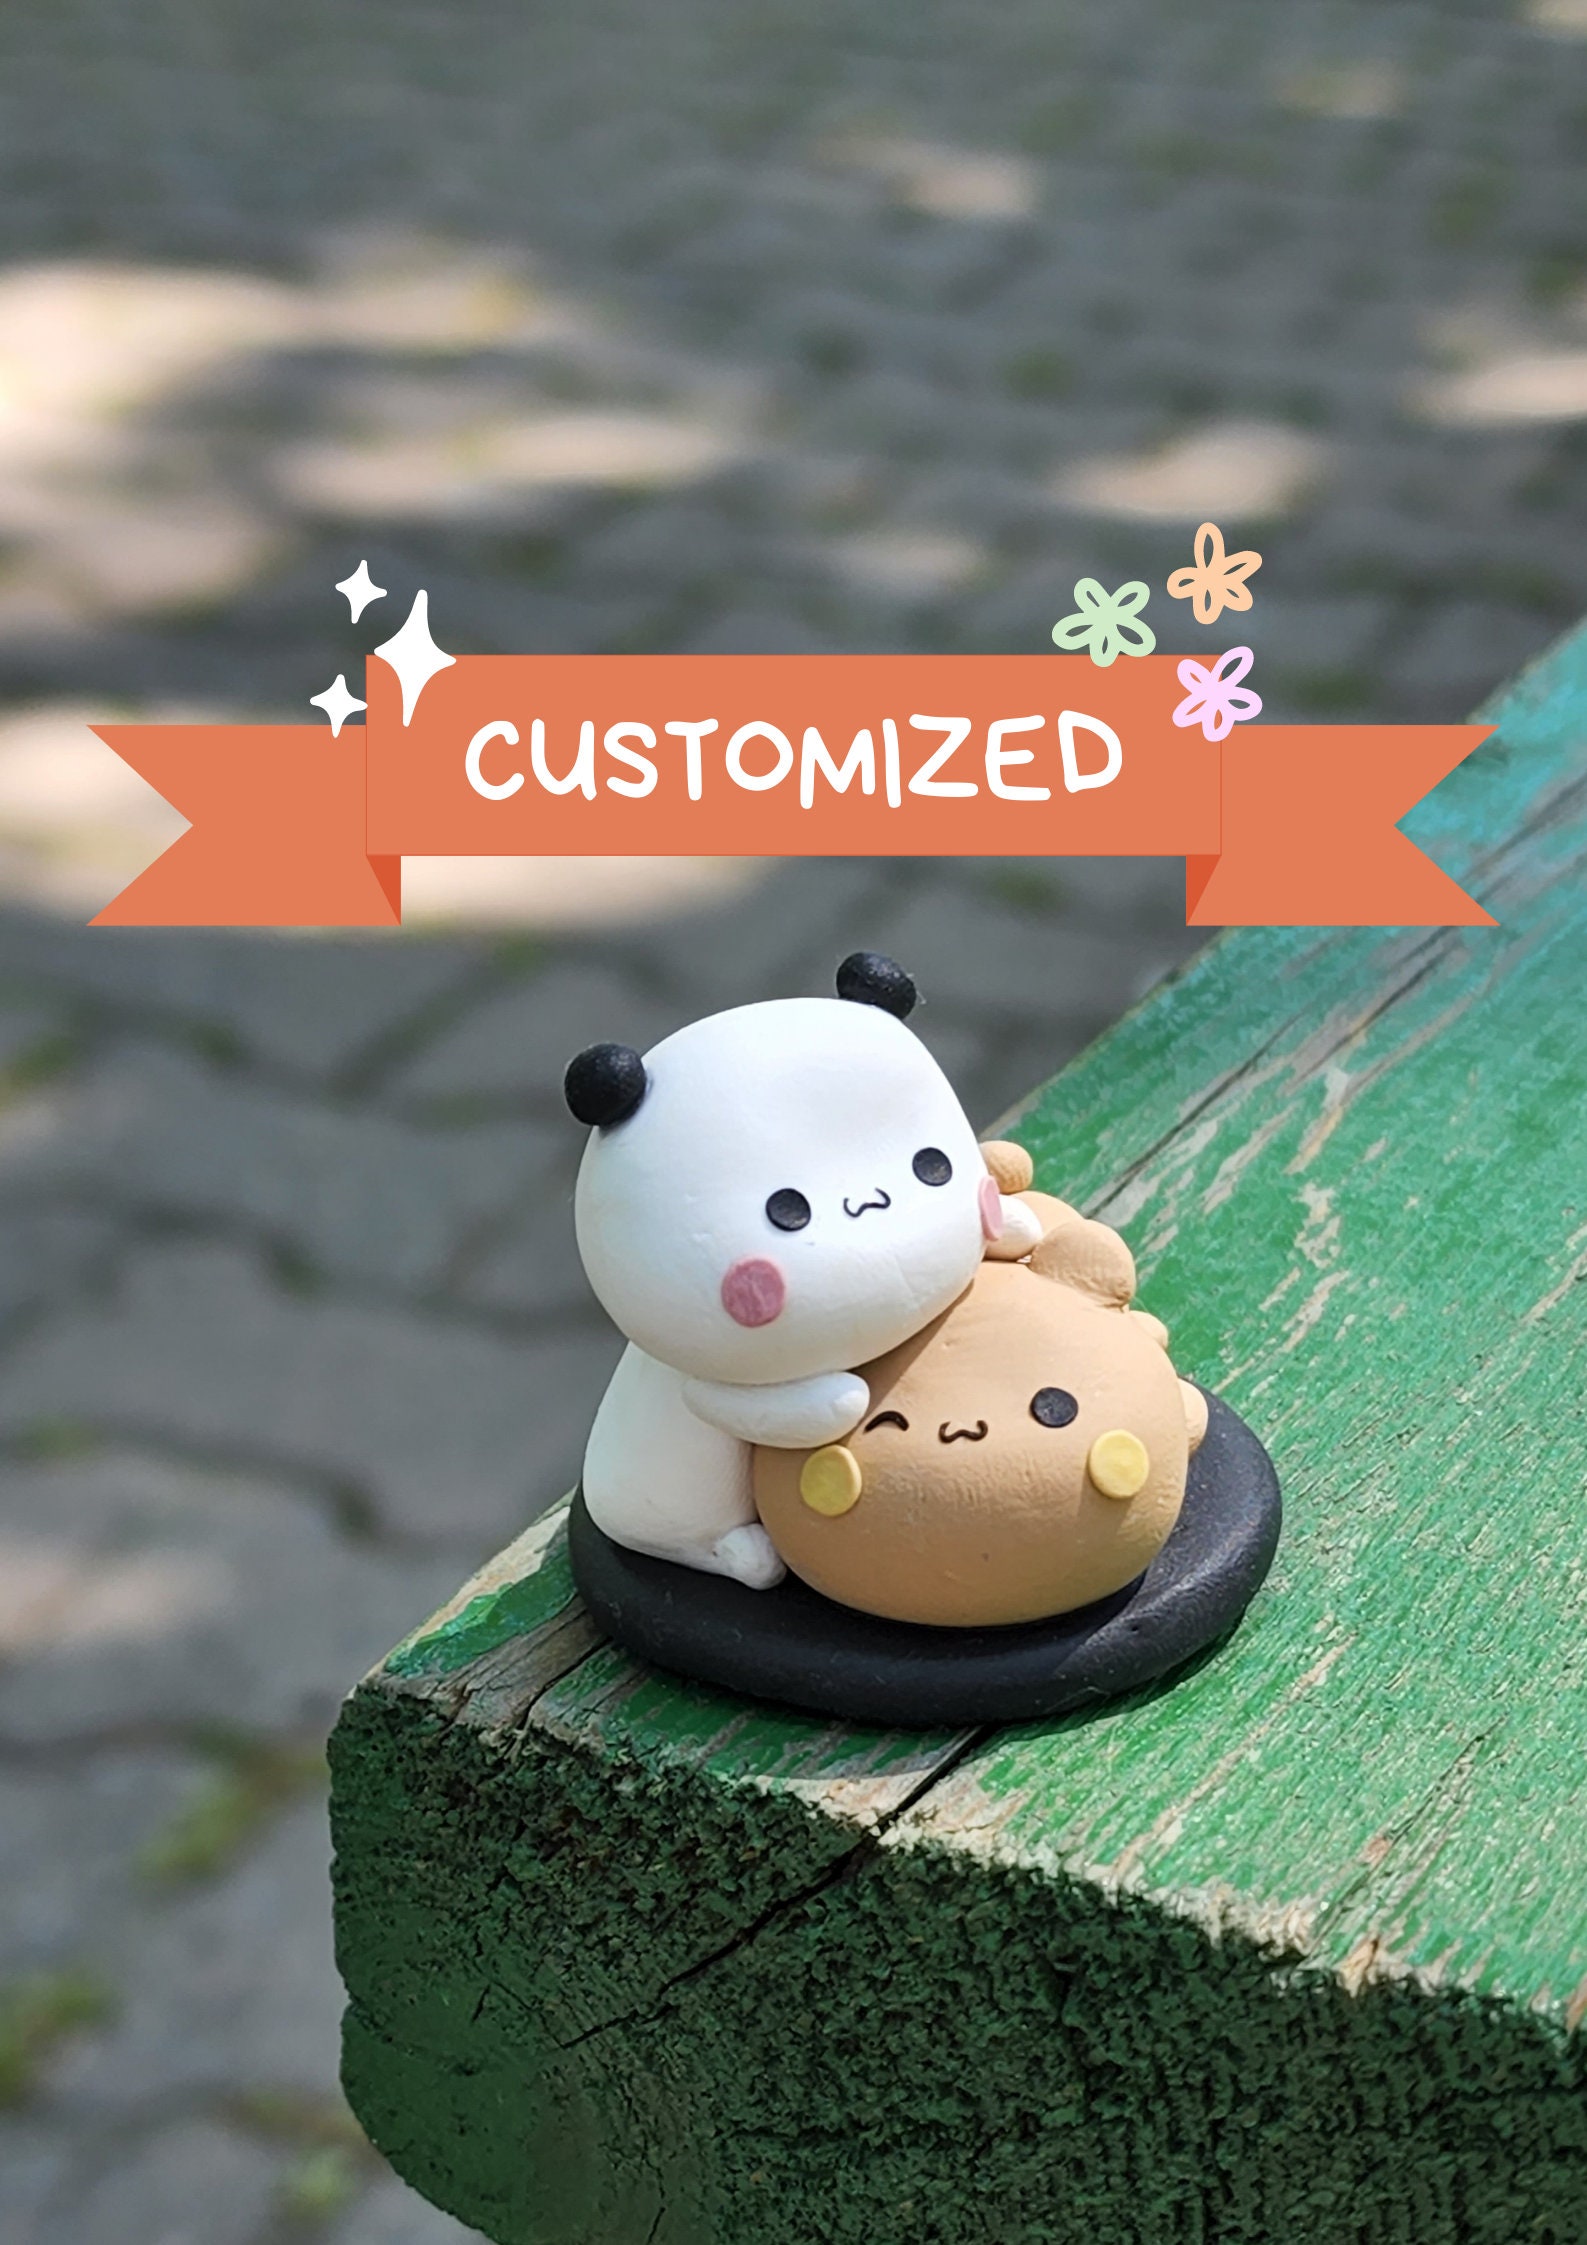 Kawaii Squishy Stuffed Animals Toys Bubu And Dudu Panda Bear Dolls Soft And  Cuddly Pillow For Kids Room Decor And Childrens Day Gifts From Meck, $14.57